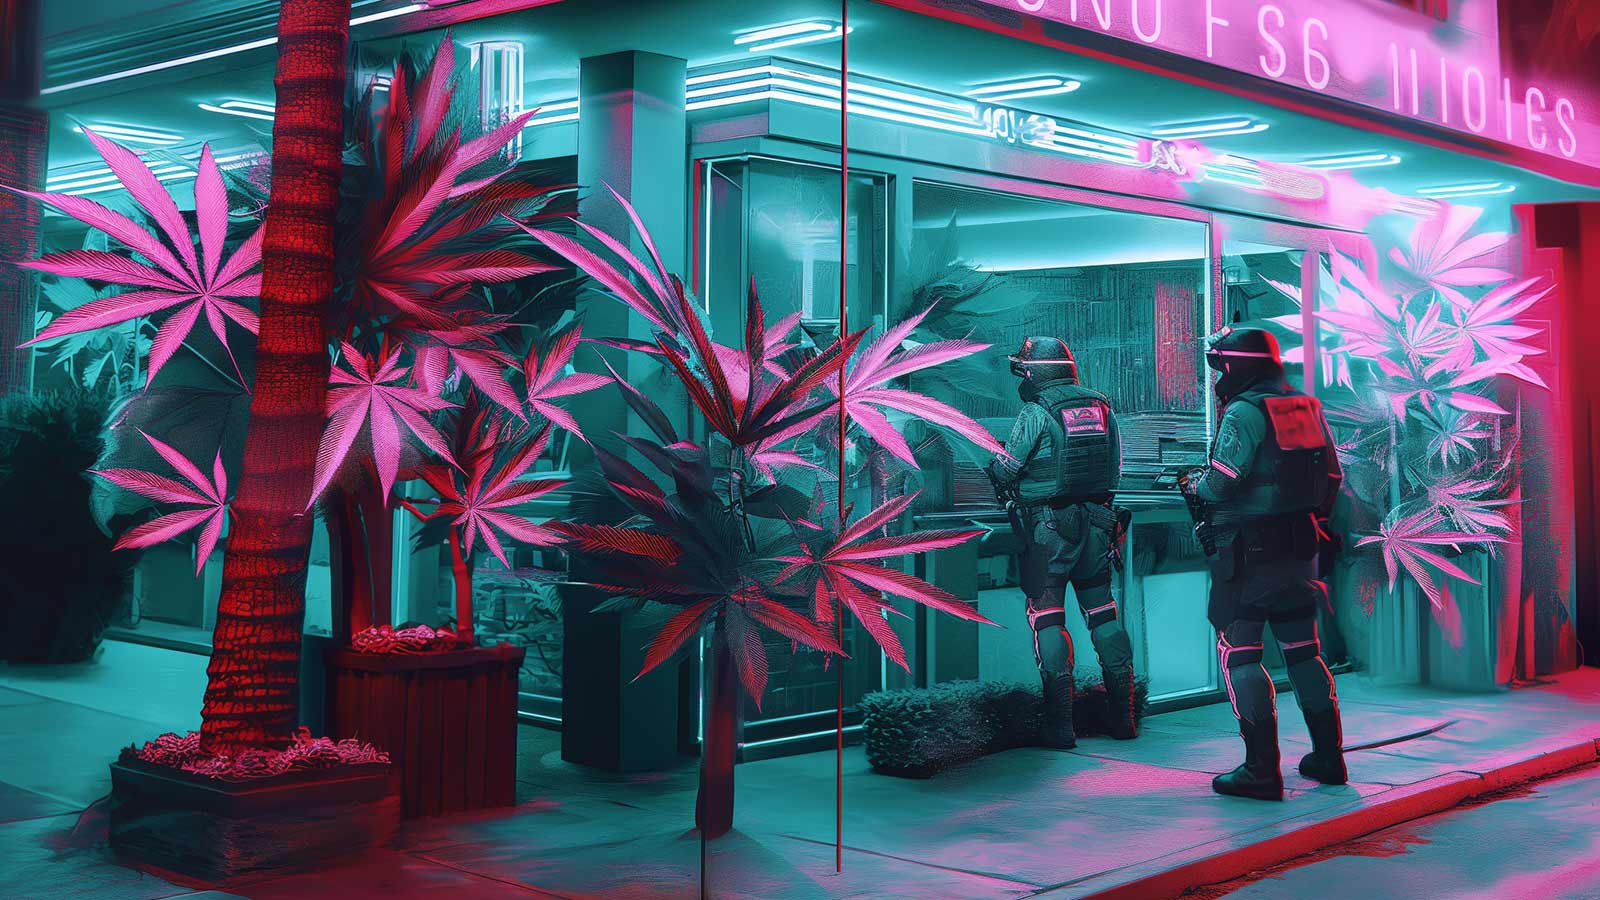 Police entering a marijuana dispensary in this AI-generated image.